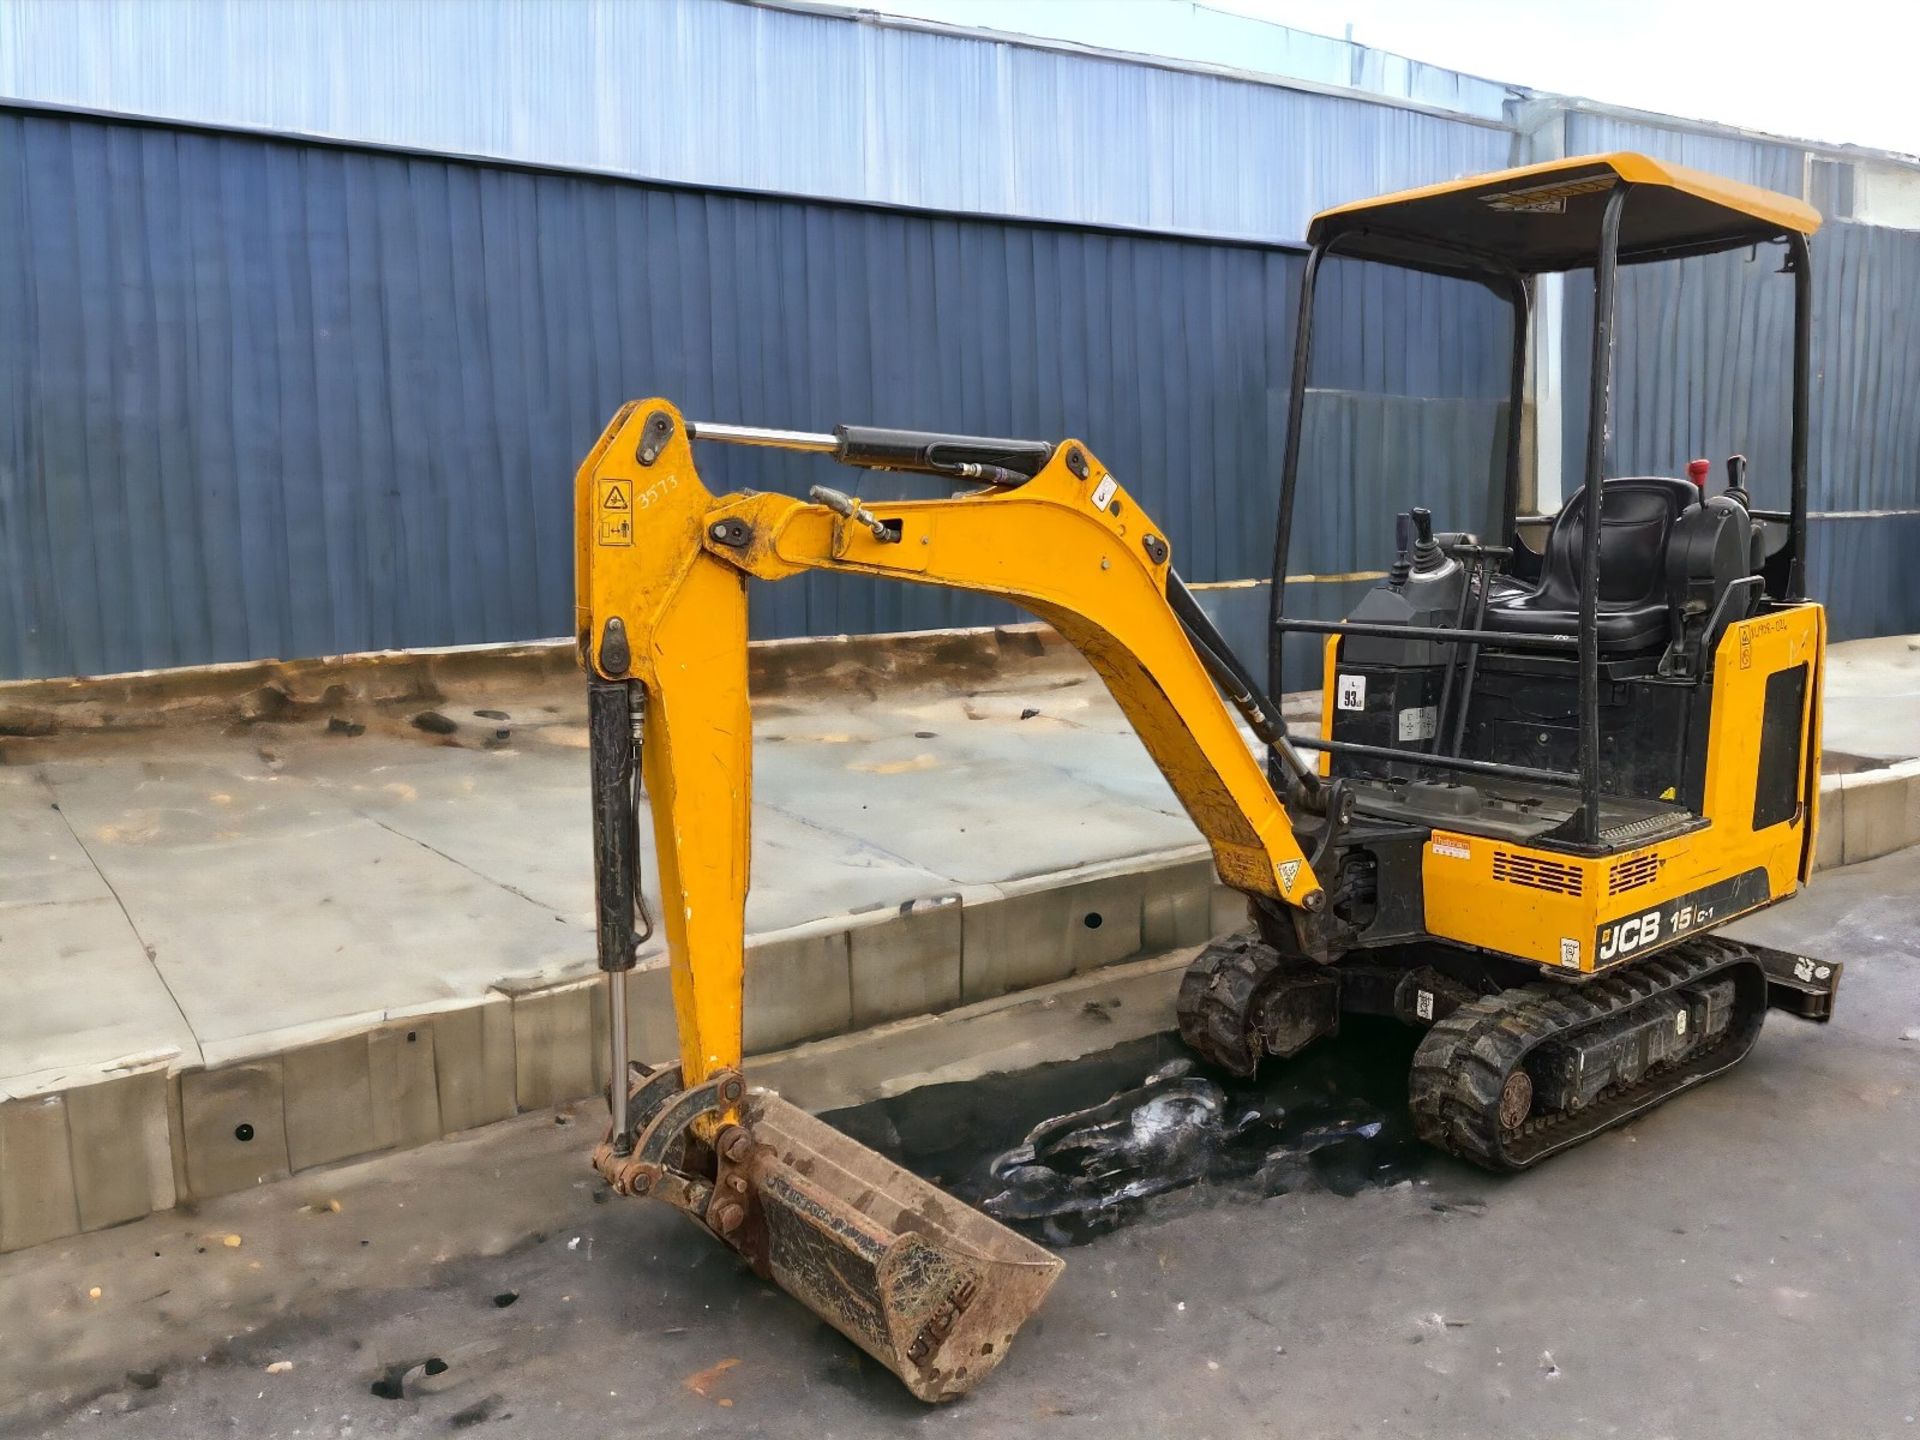 ELEVATE YOUR CONSTRUCTION GAME WITH THE JCB 15 C-1 MINI EXCAVATO - Image 3 of 11